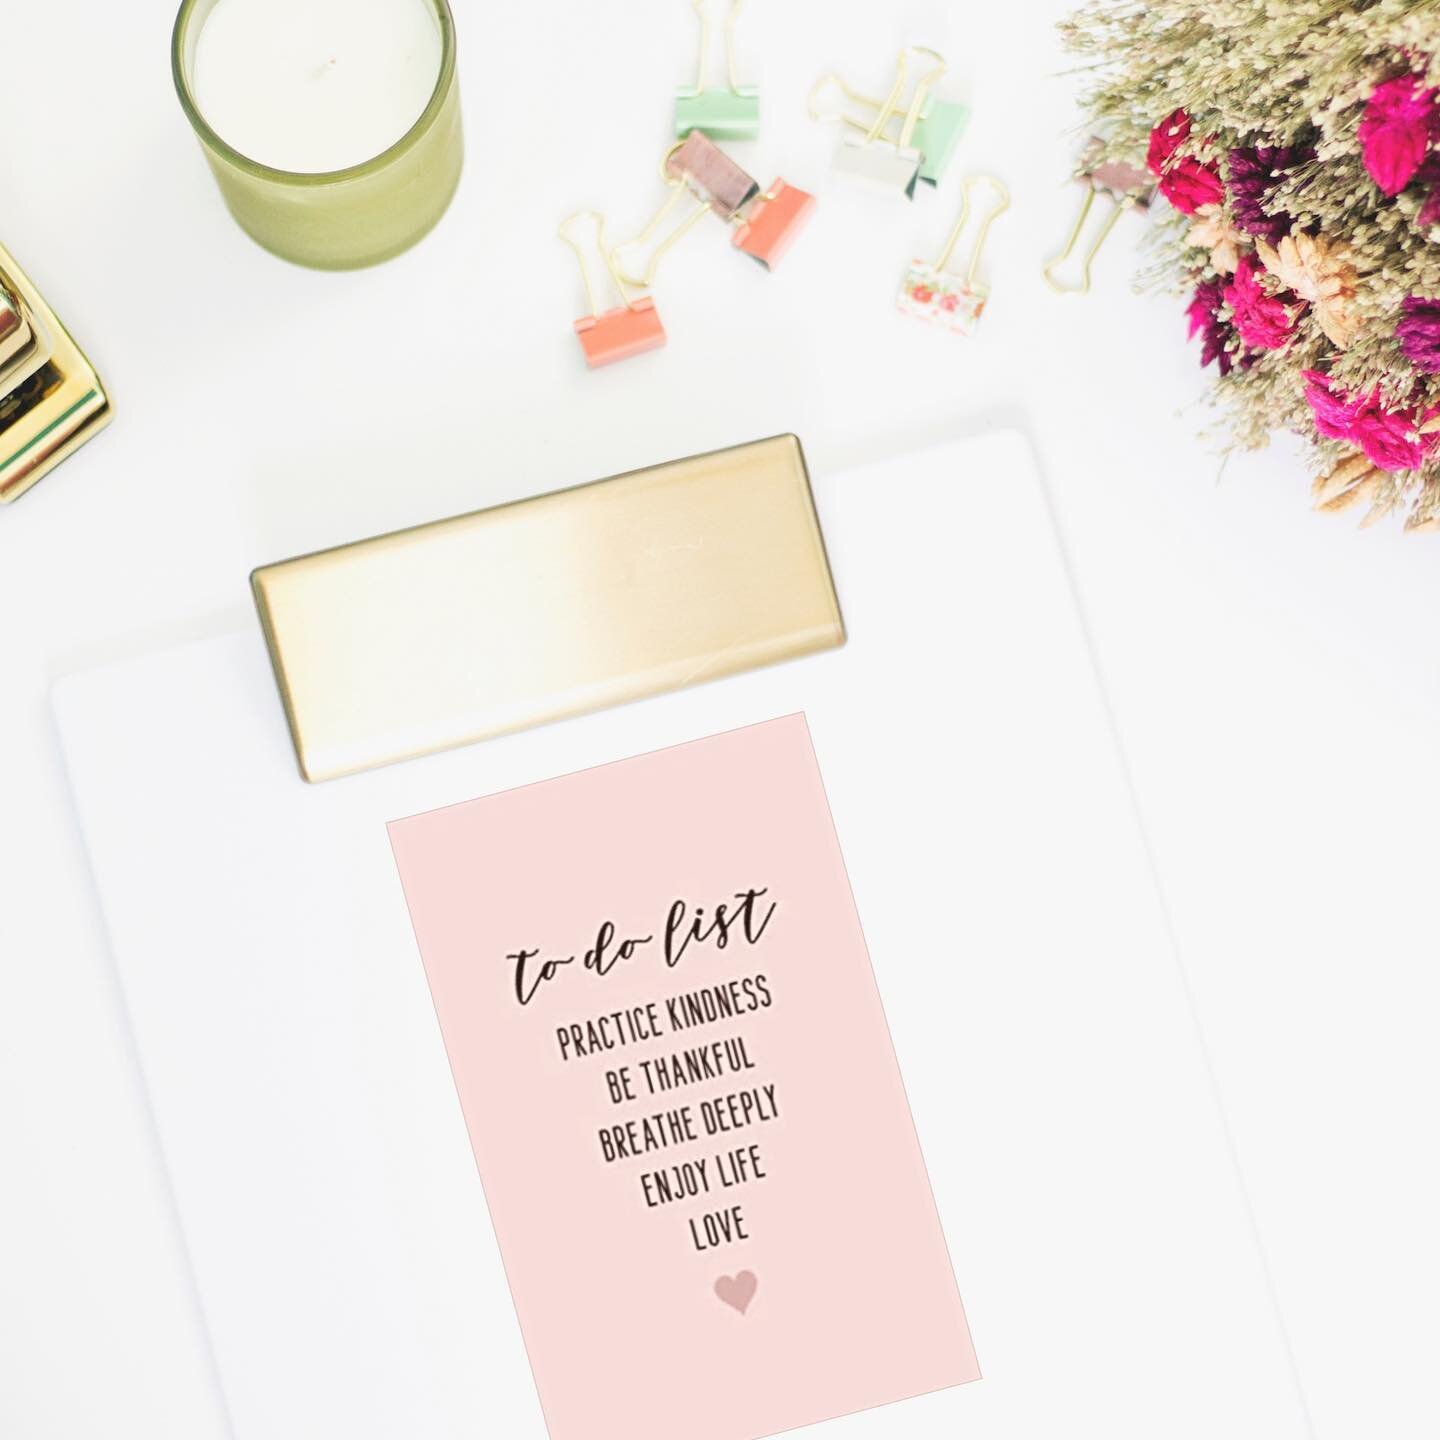 I always have a full to do list. Between real estate, owning a company and being a Momma most times it&rsquo;s never ending. These are some everyday items I do not compromise on.

There are always enough hours in the day to practice kindness, be than